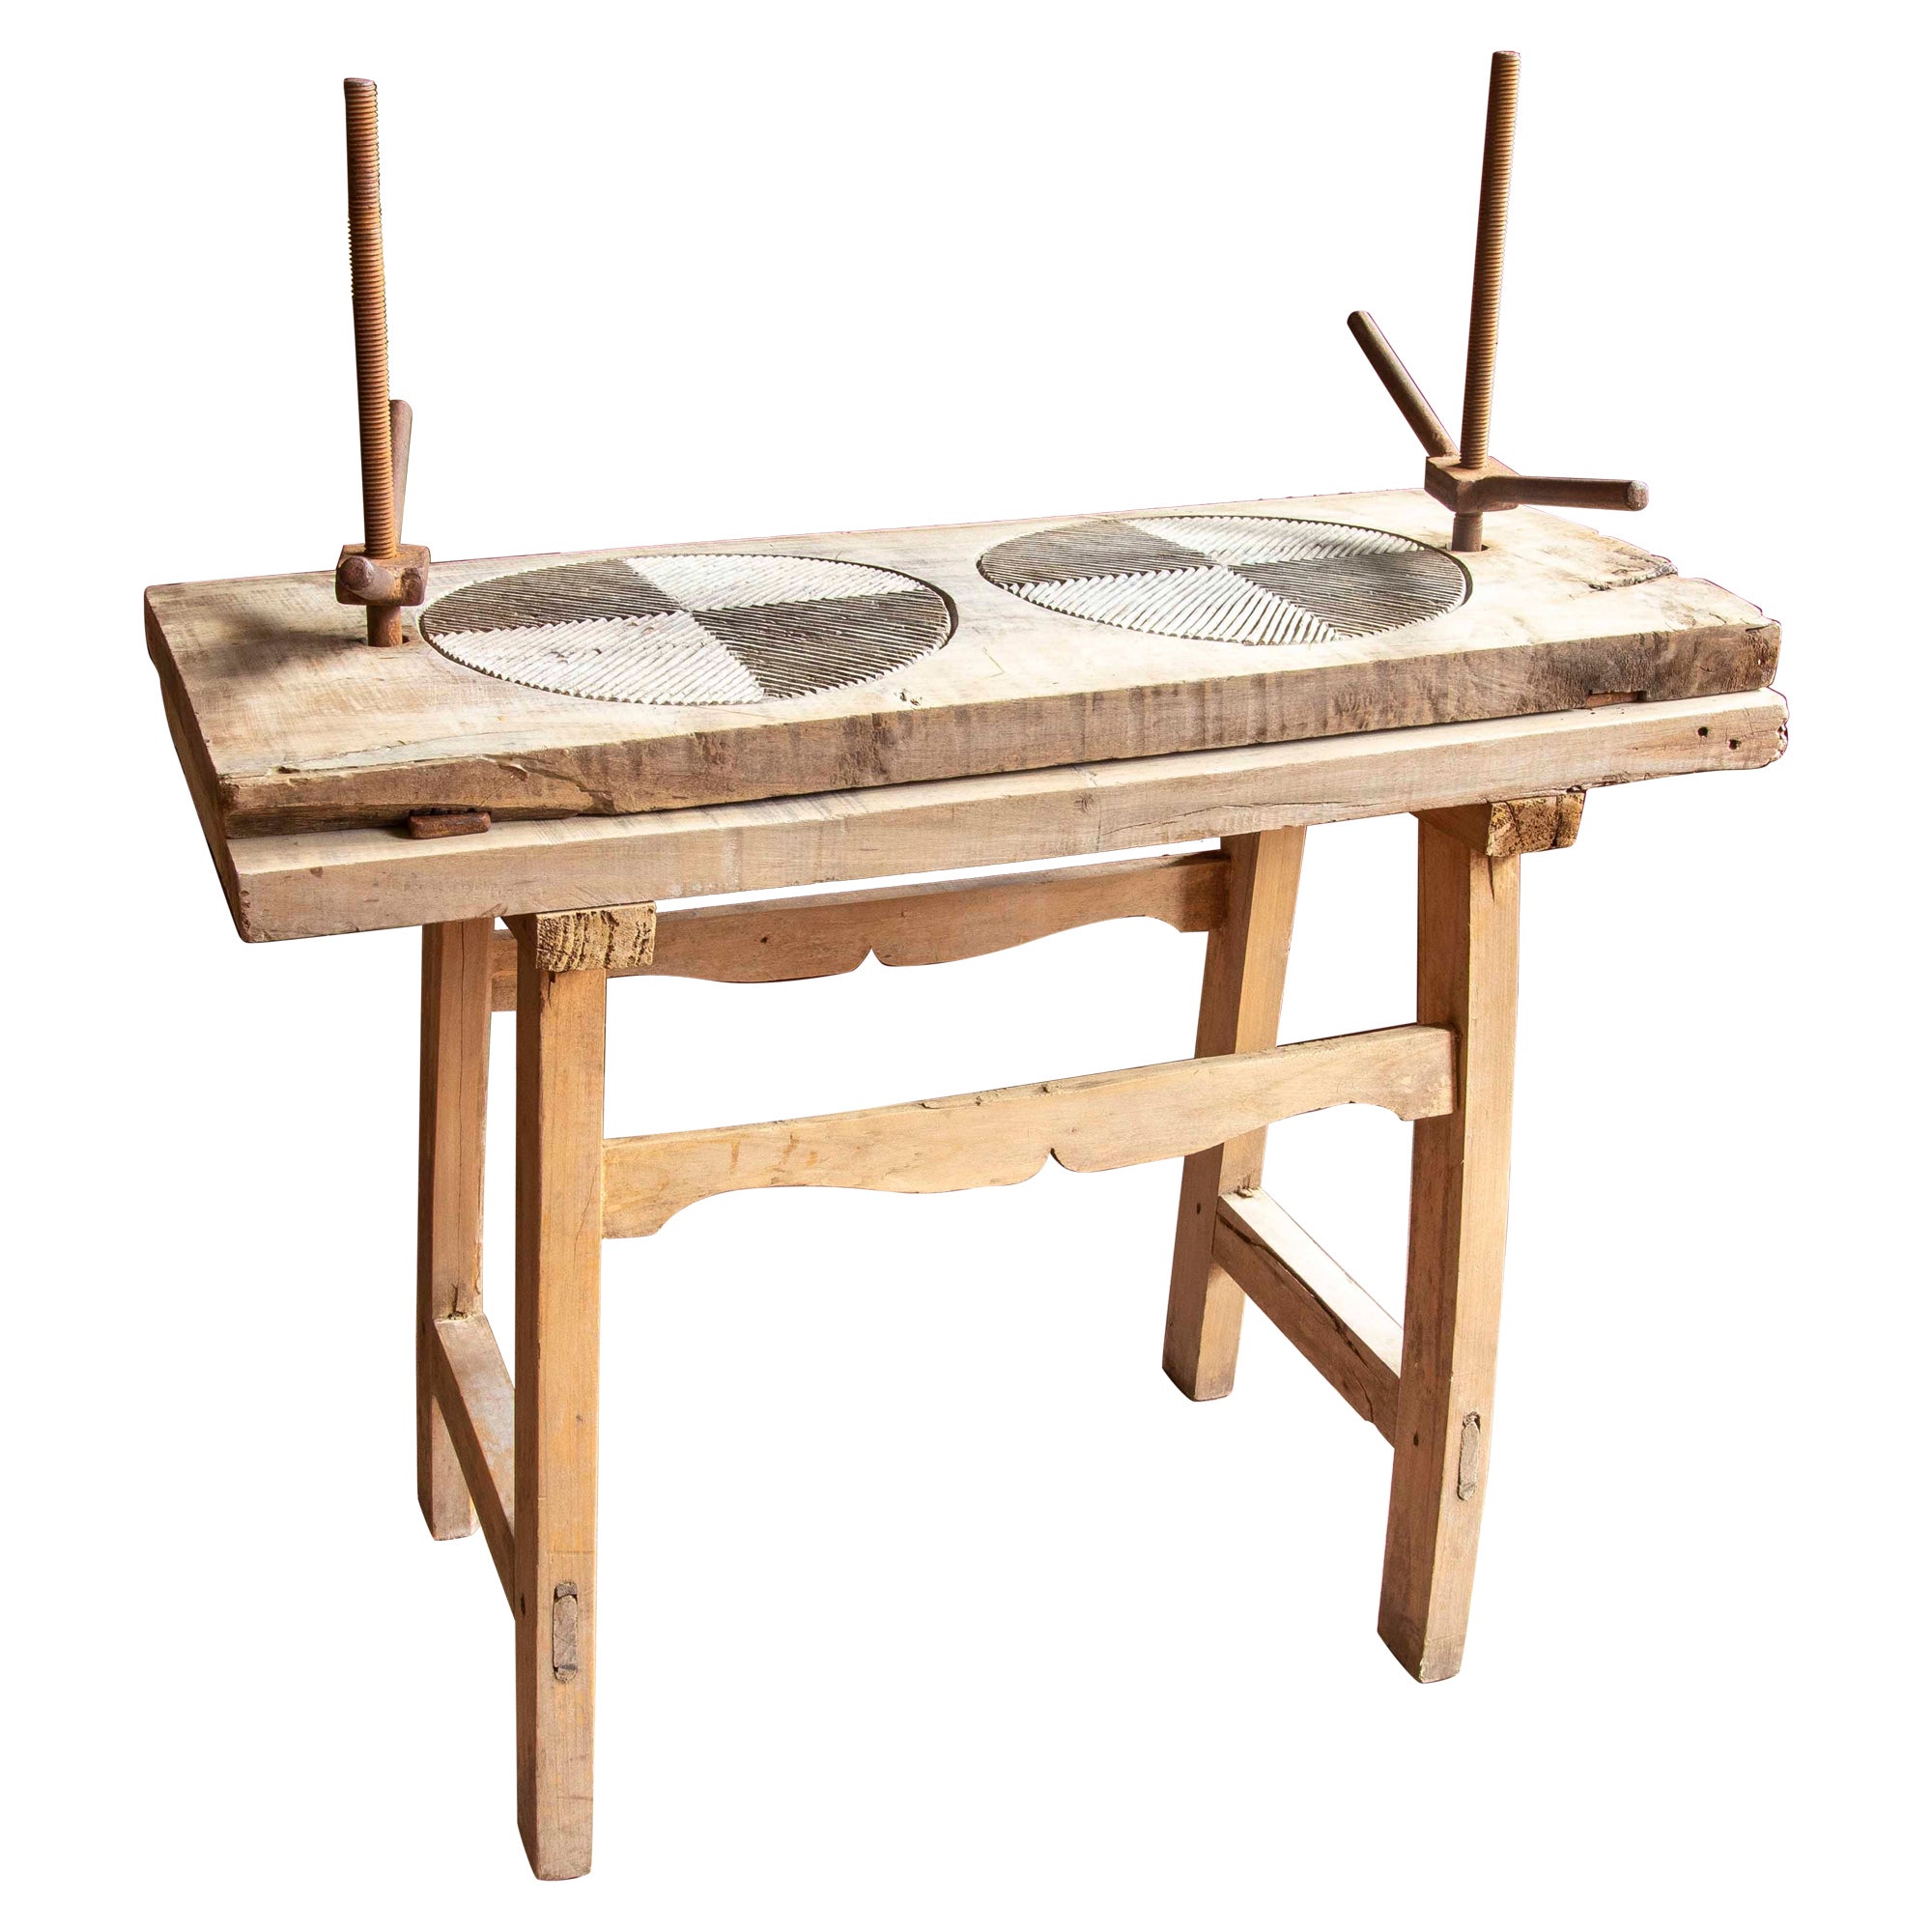 Spanish Wooden Press for Cheese Making For Sale